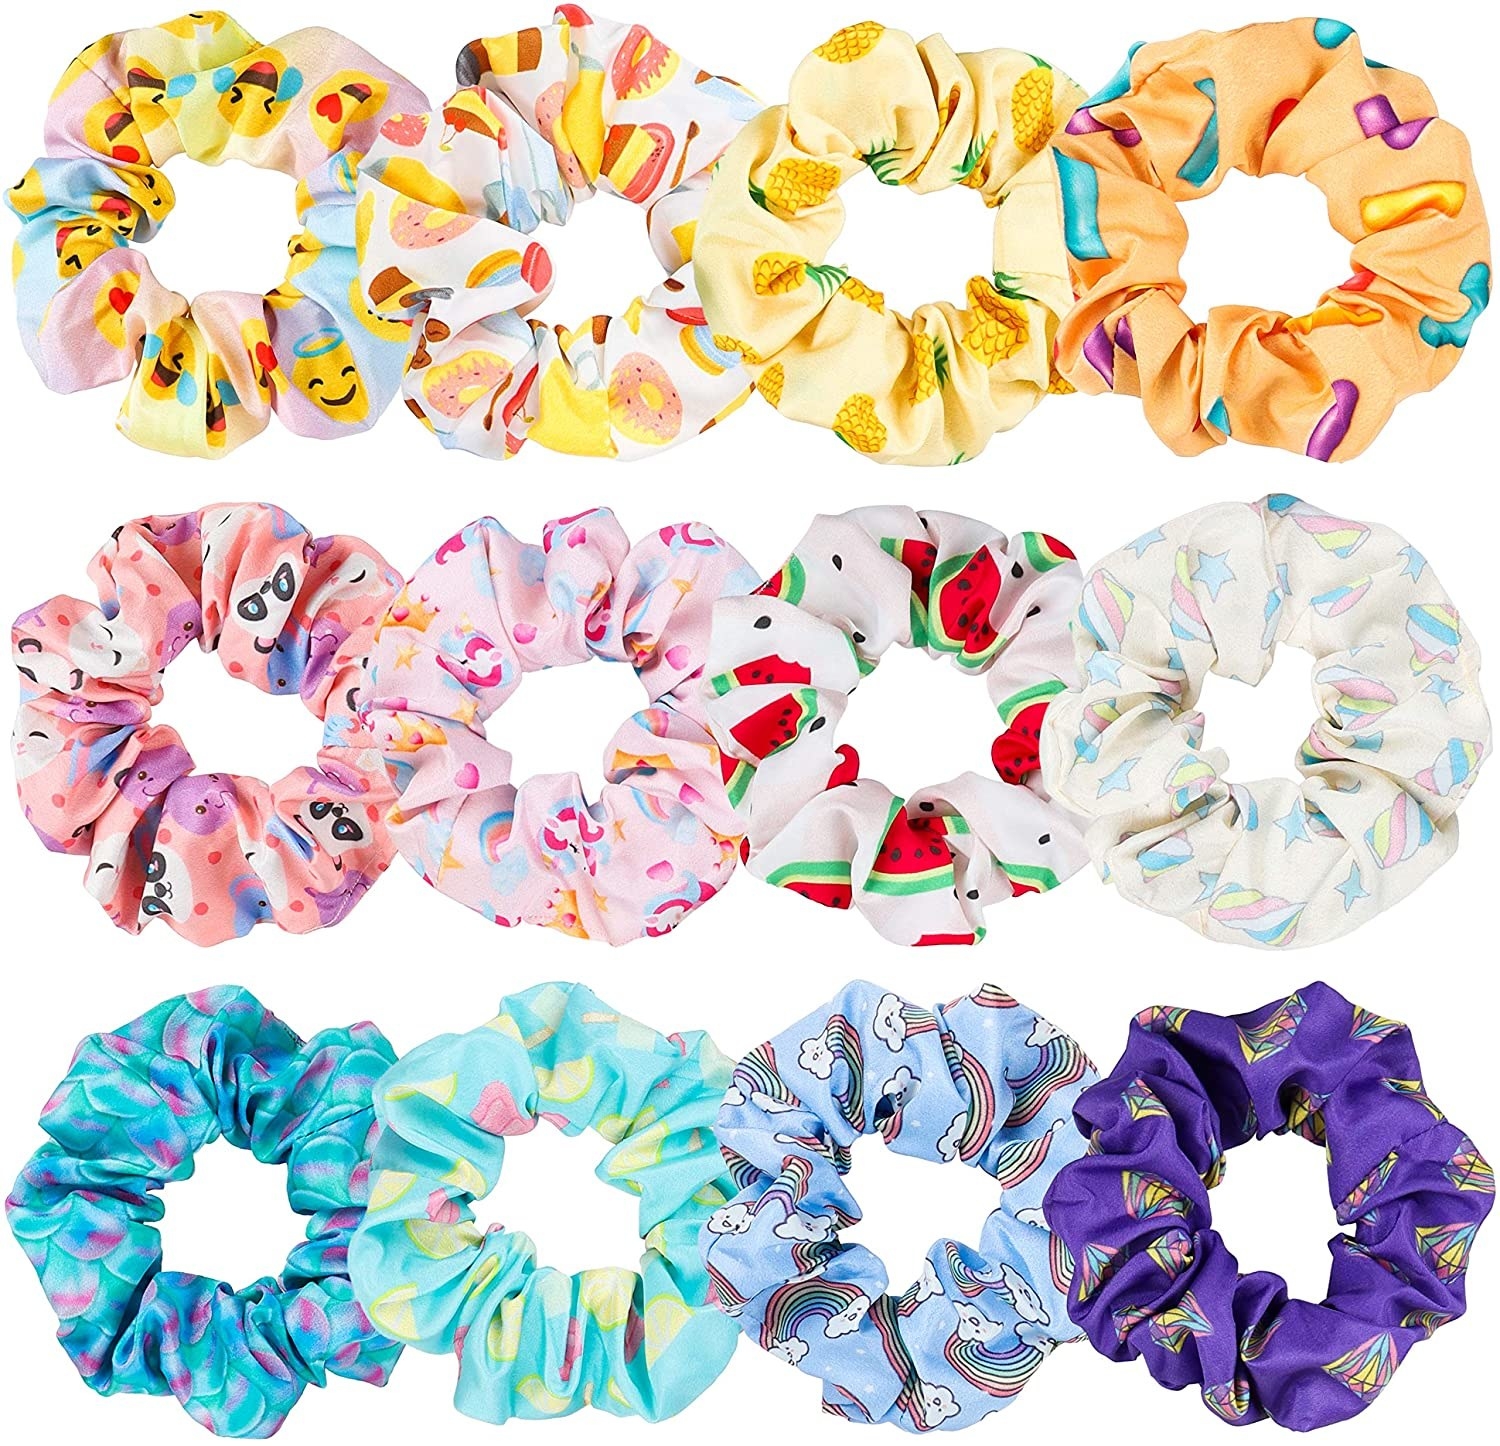 The twelve scrunchies laid out to show their patterns